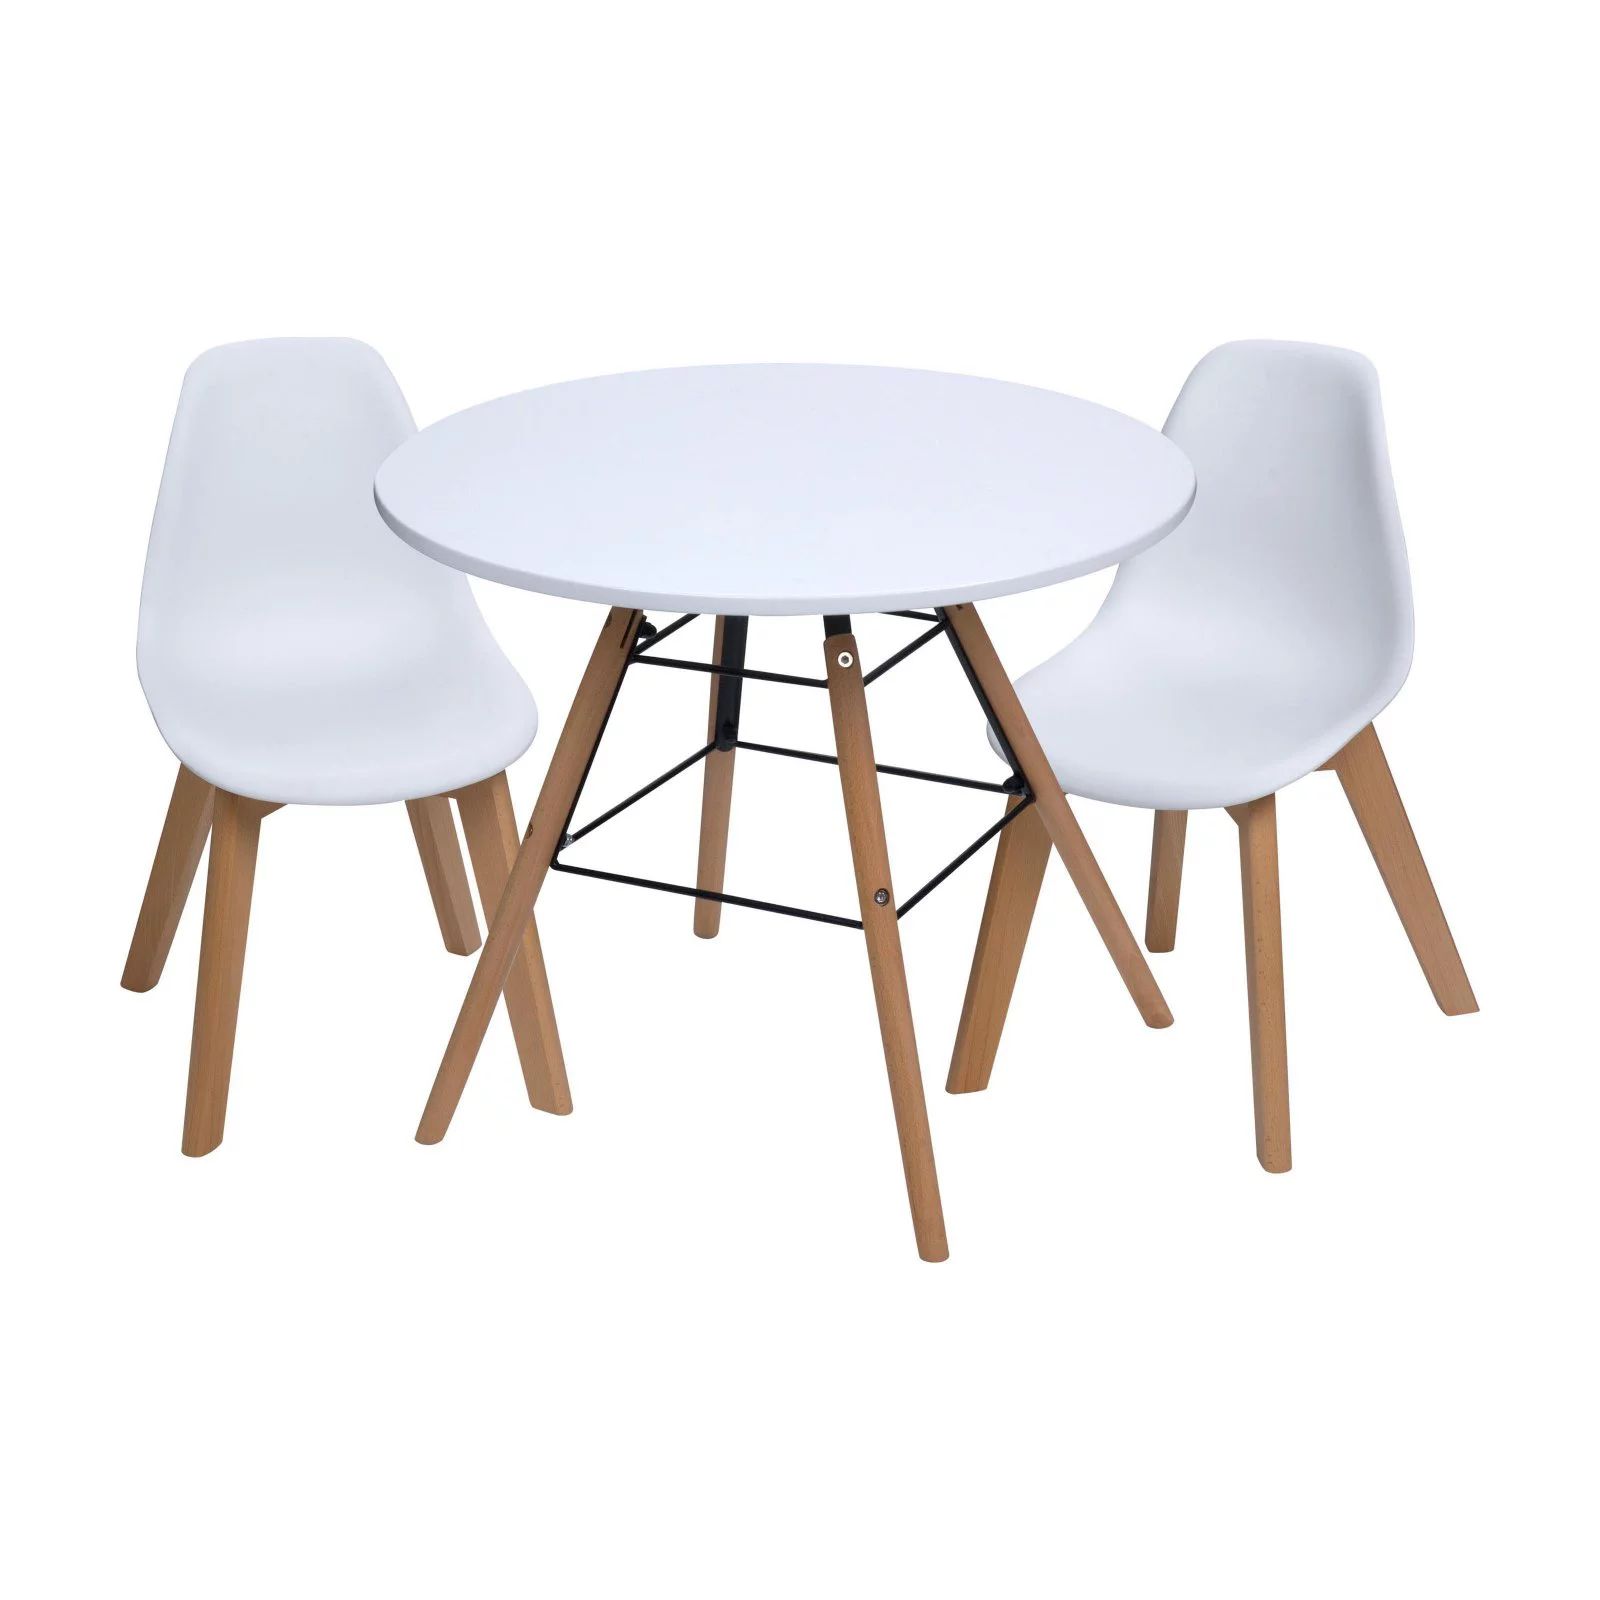 Gift Mark Mid-Century Modern Round Kids Table with White Chairs | Walmart (US)